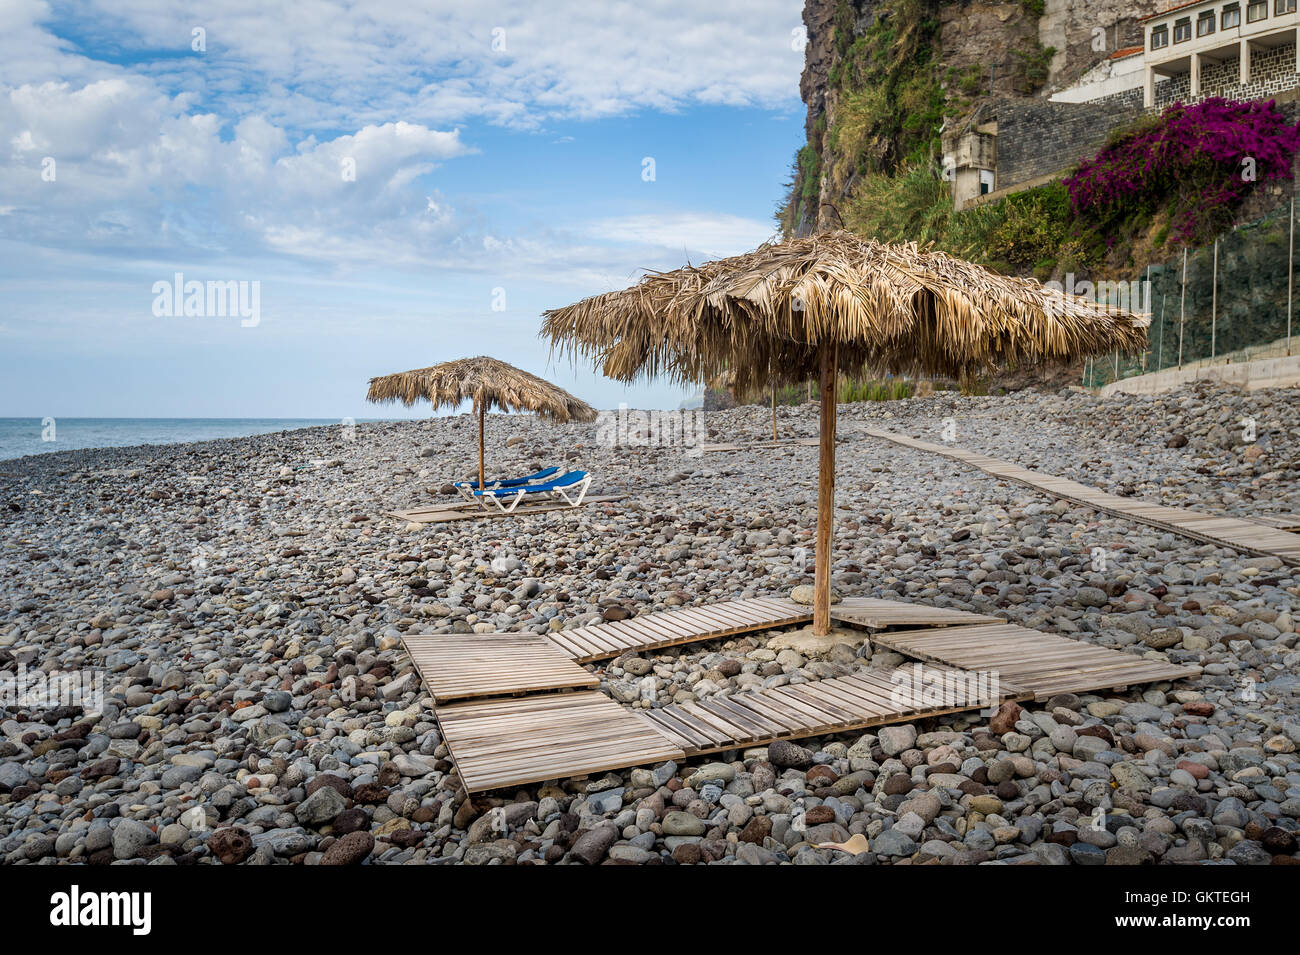 Thatched beach umbrellas and wooden beds at Ponta do Sol, Madeira island. Stock Photo